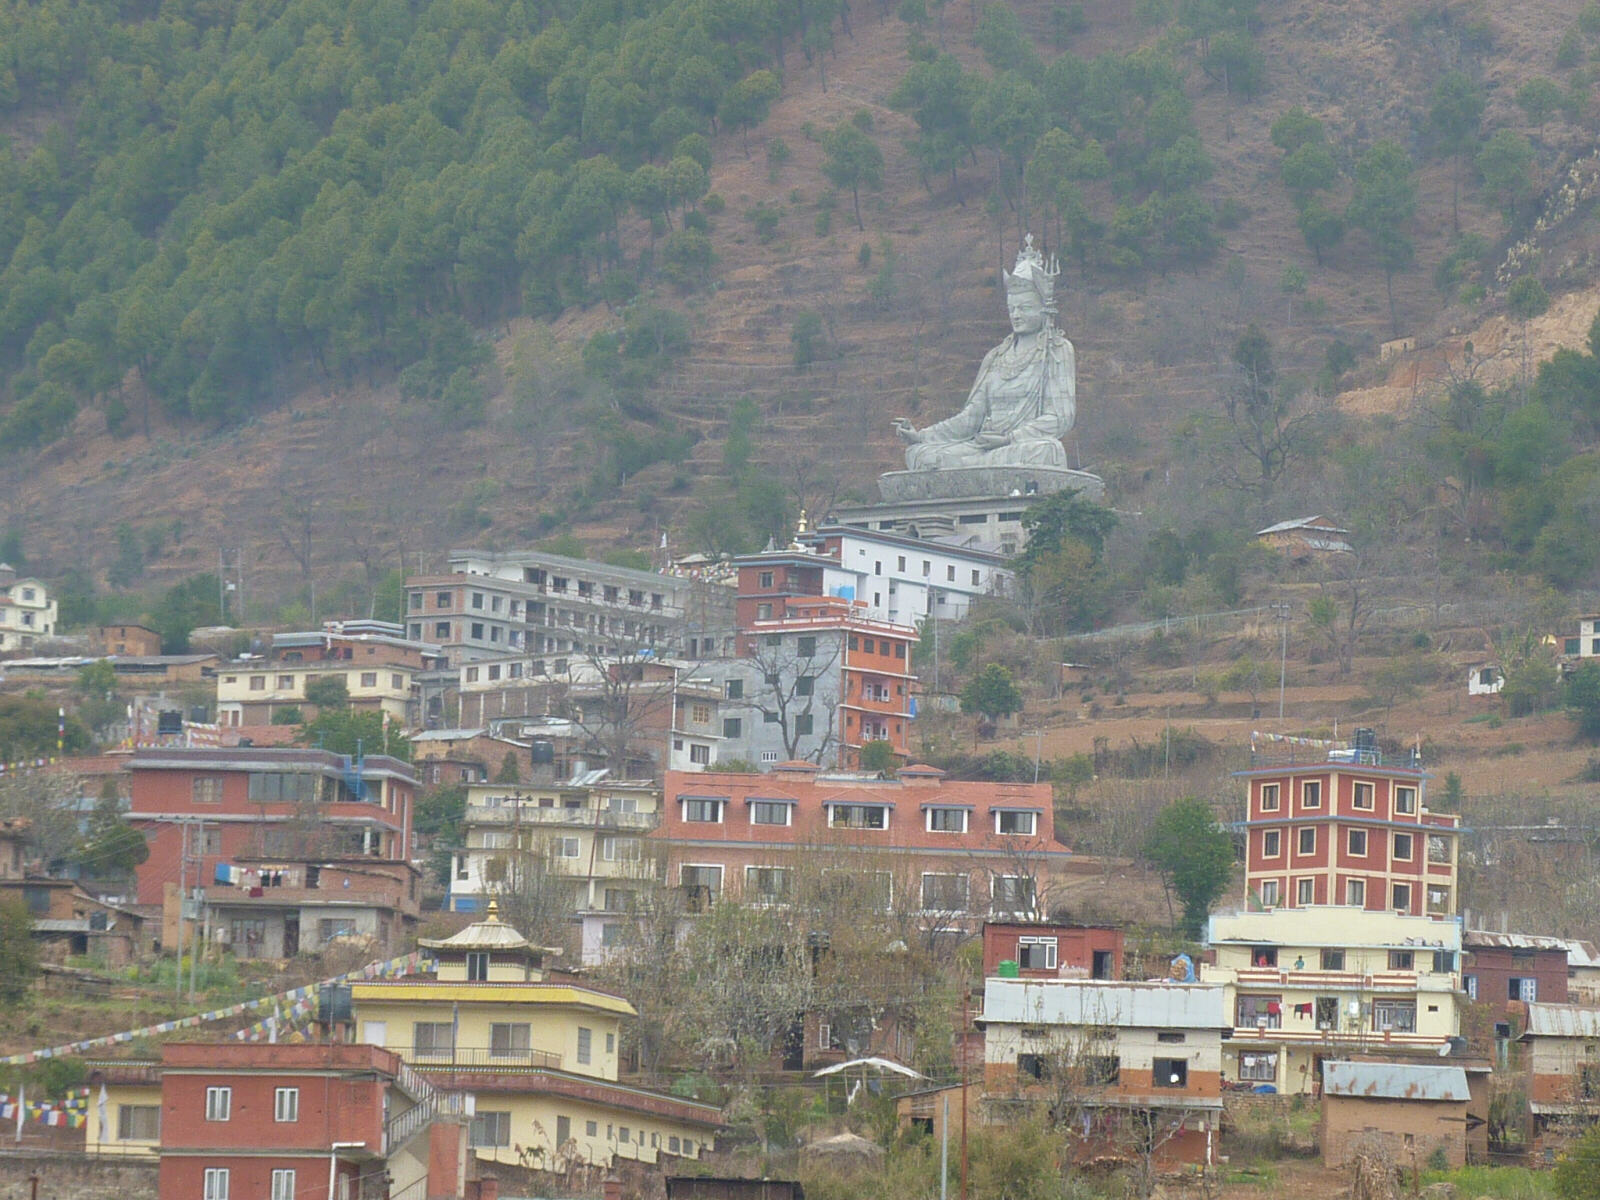 A giant Buddha protecting a mountain village in Nepal